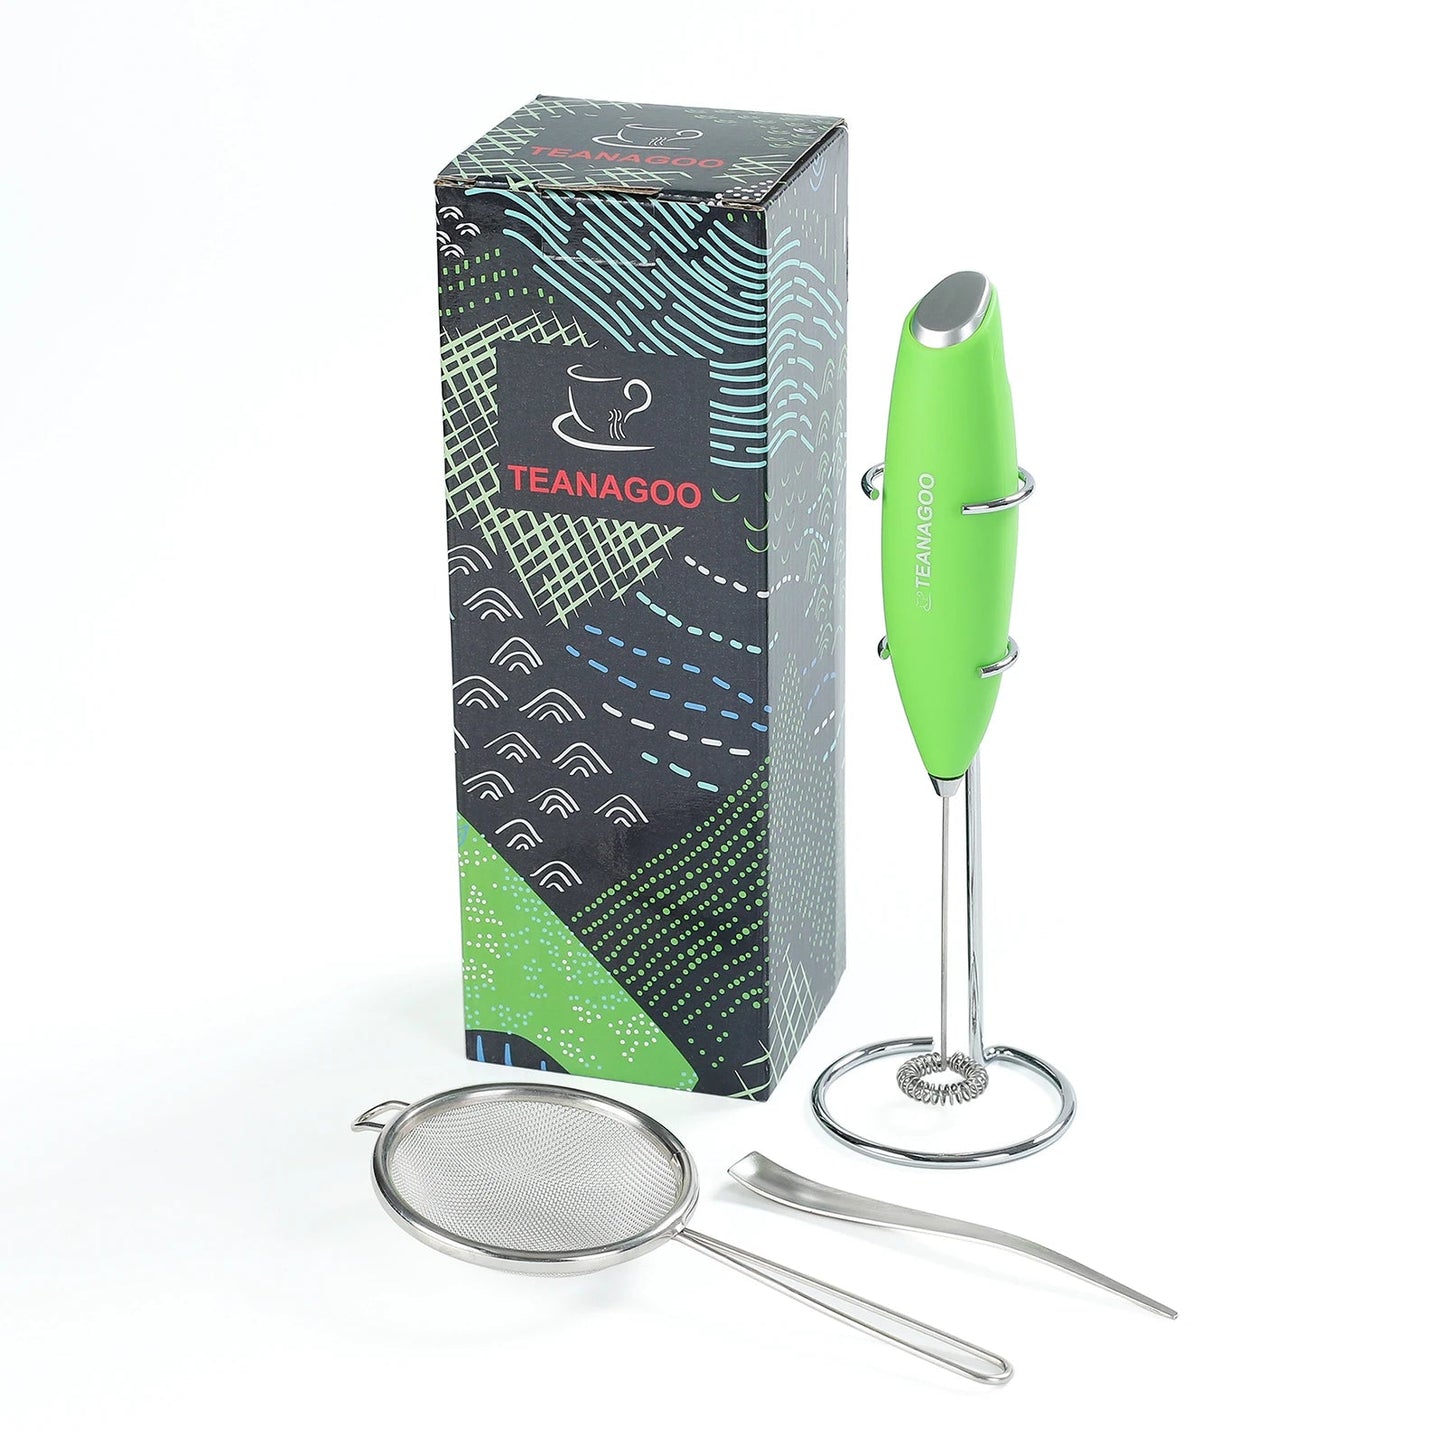 MATCHA ELECTRIC FROTHER WHISK - The Specialist Tea Co.